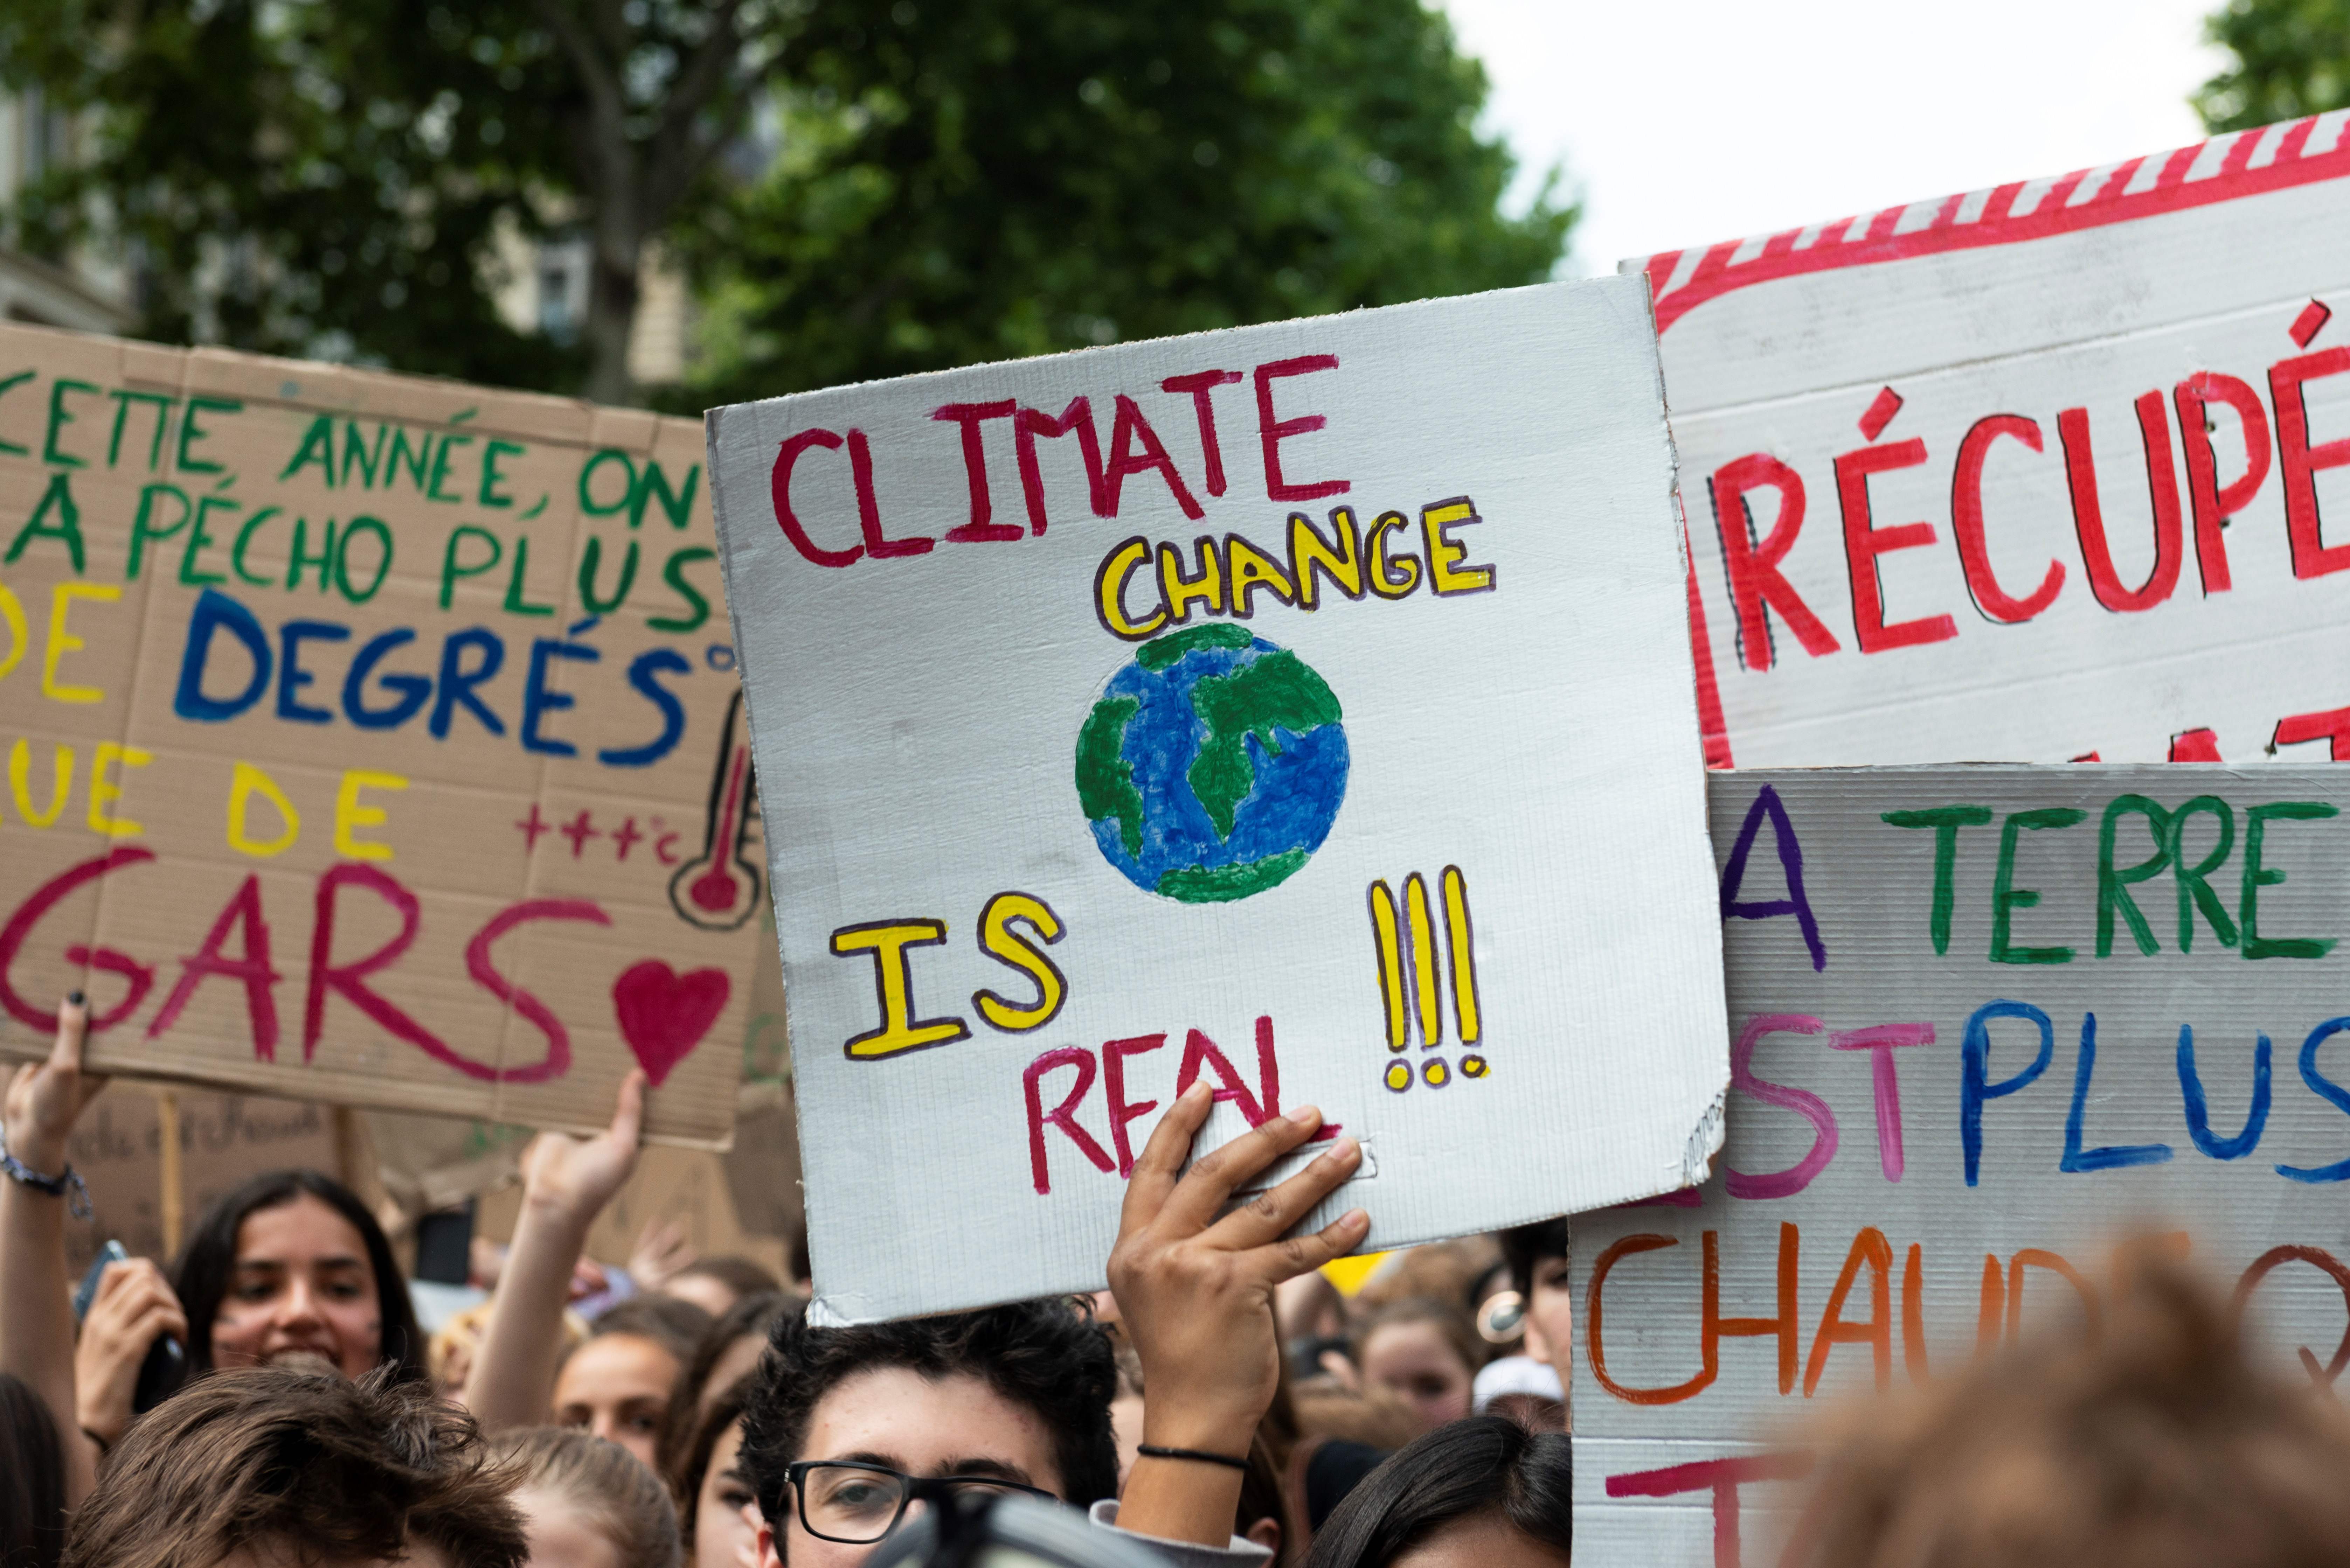 Youths take part in a protest demanding urgent action against global warming, as part of the worldwide youth campaign ahead of the EU elections, on May 24, 2019, in Paris. (Photo by - / AFP) (Photo credit should read -/AFP/Getty Images)